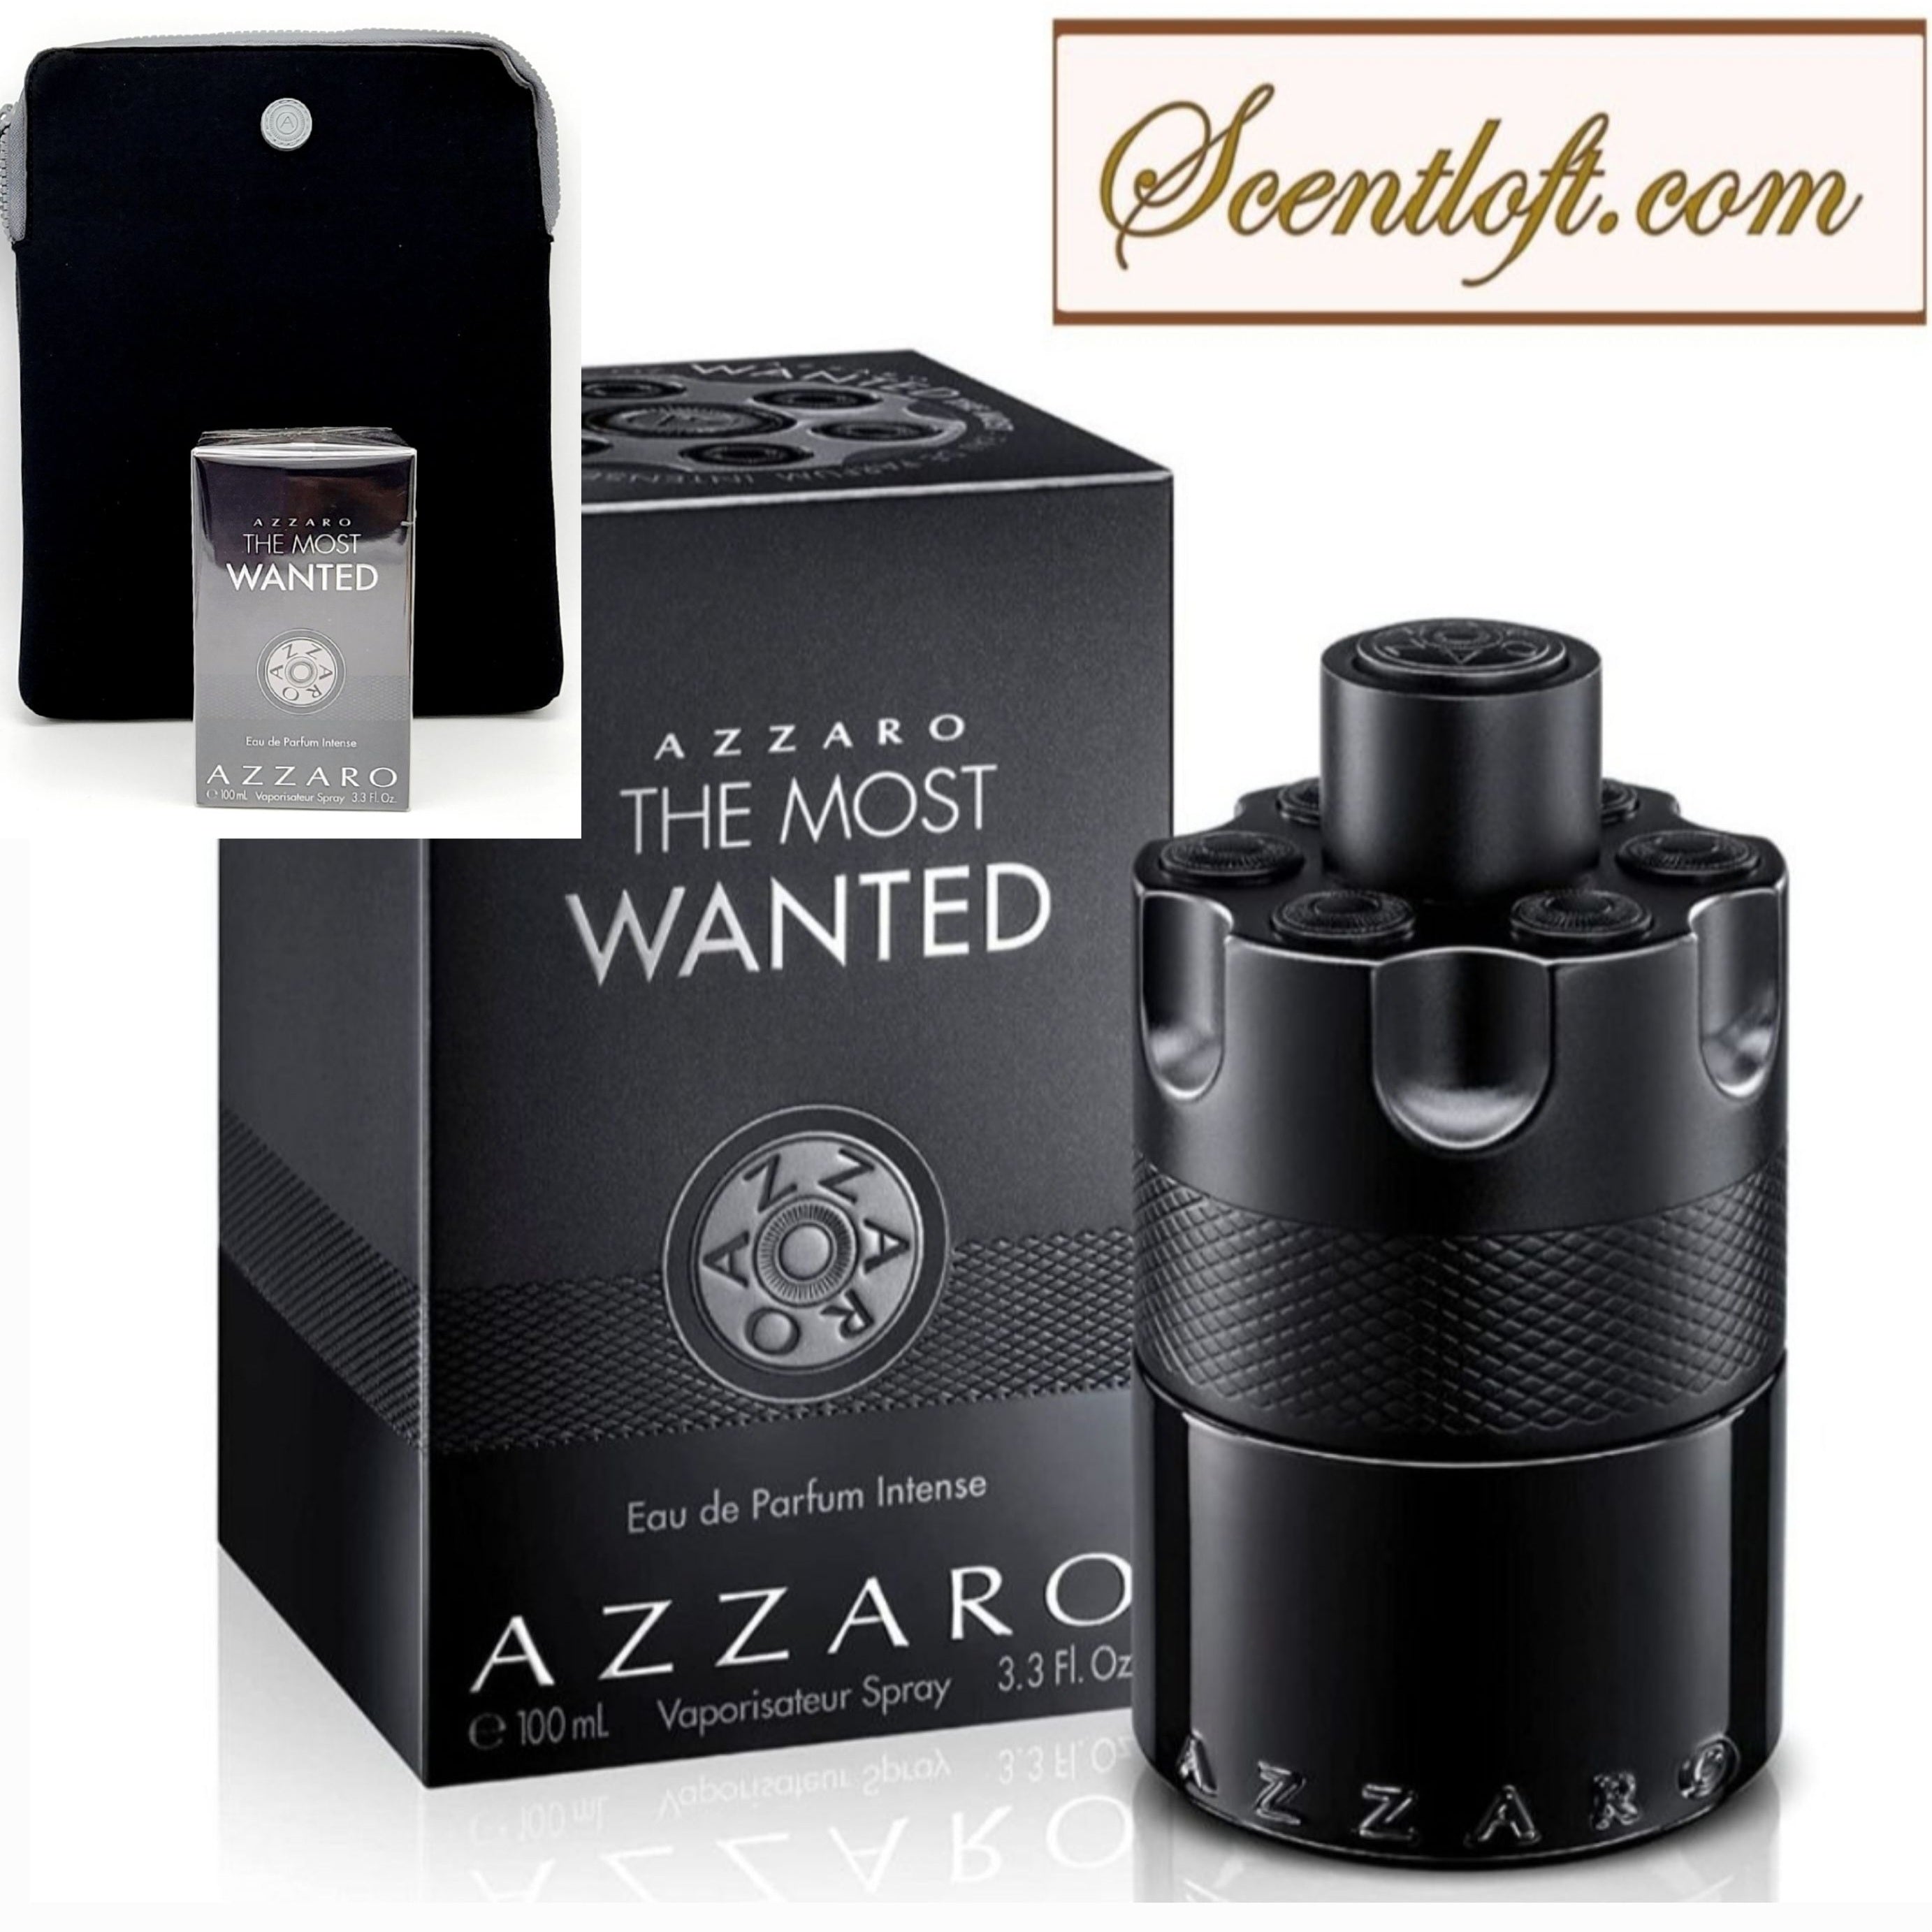 AZZARO The Most Wanted EDP Intense 100ml + Free Azzaro Tablet Pouch *